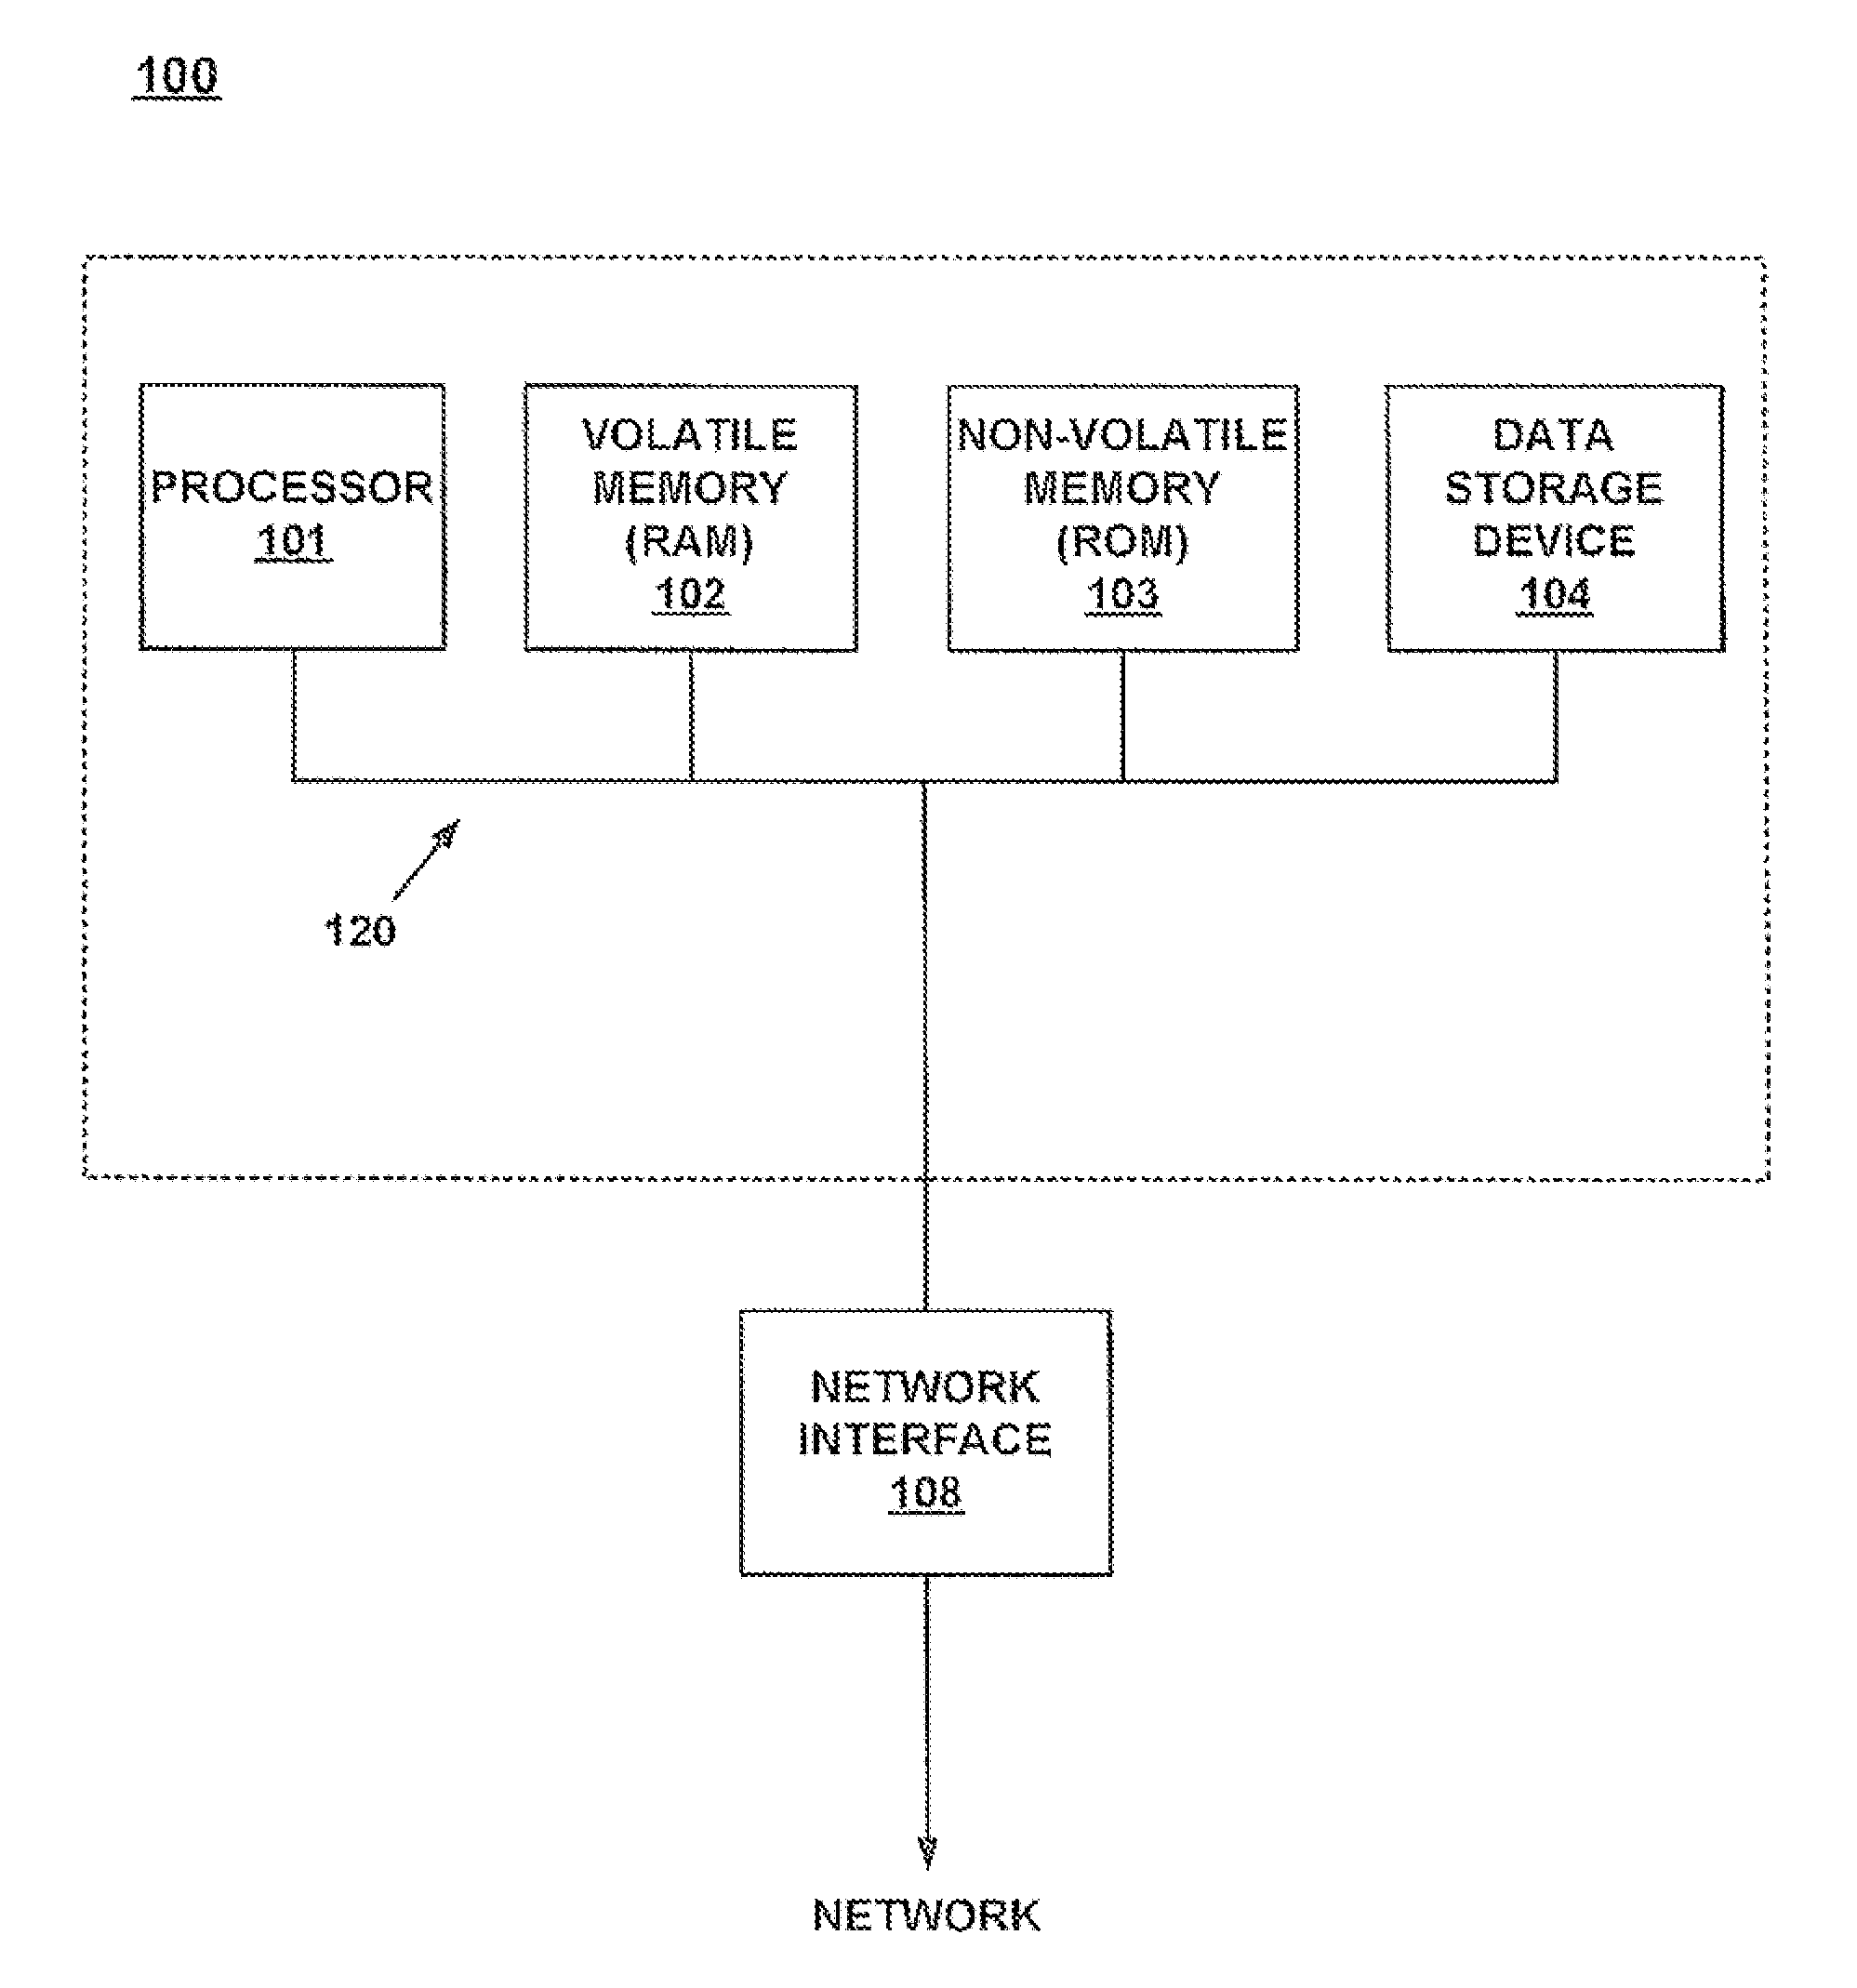 Method and system for automatically repairing a fraudulent identity theft incident